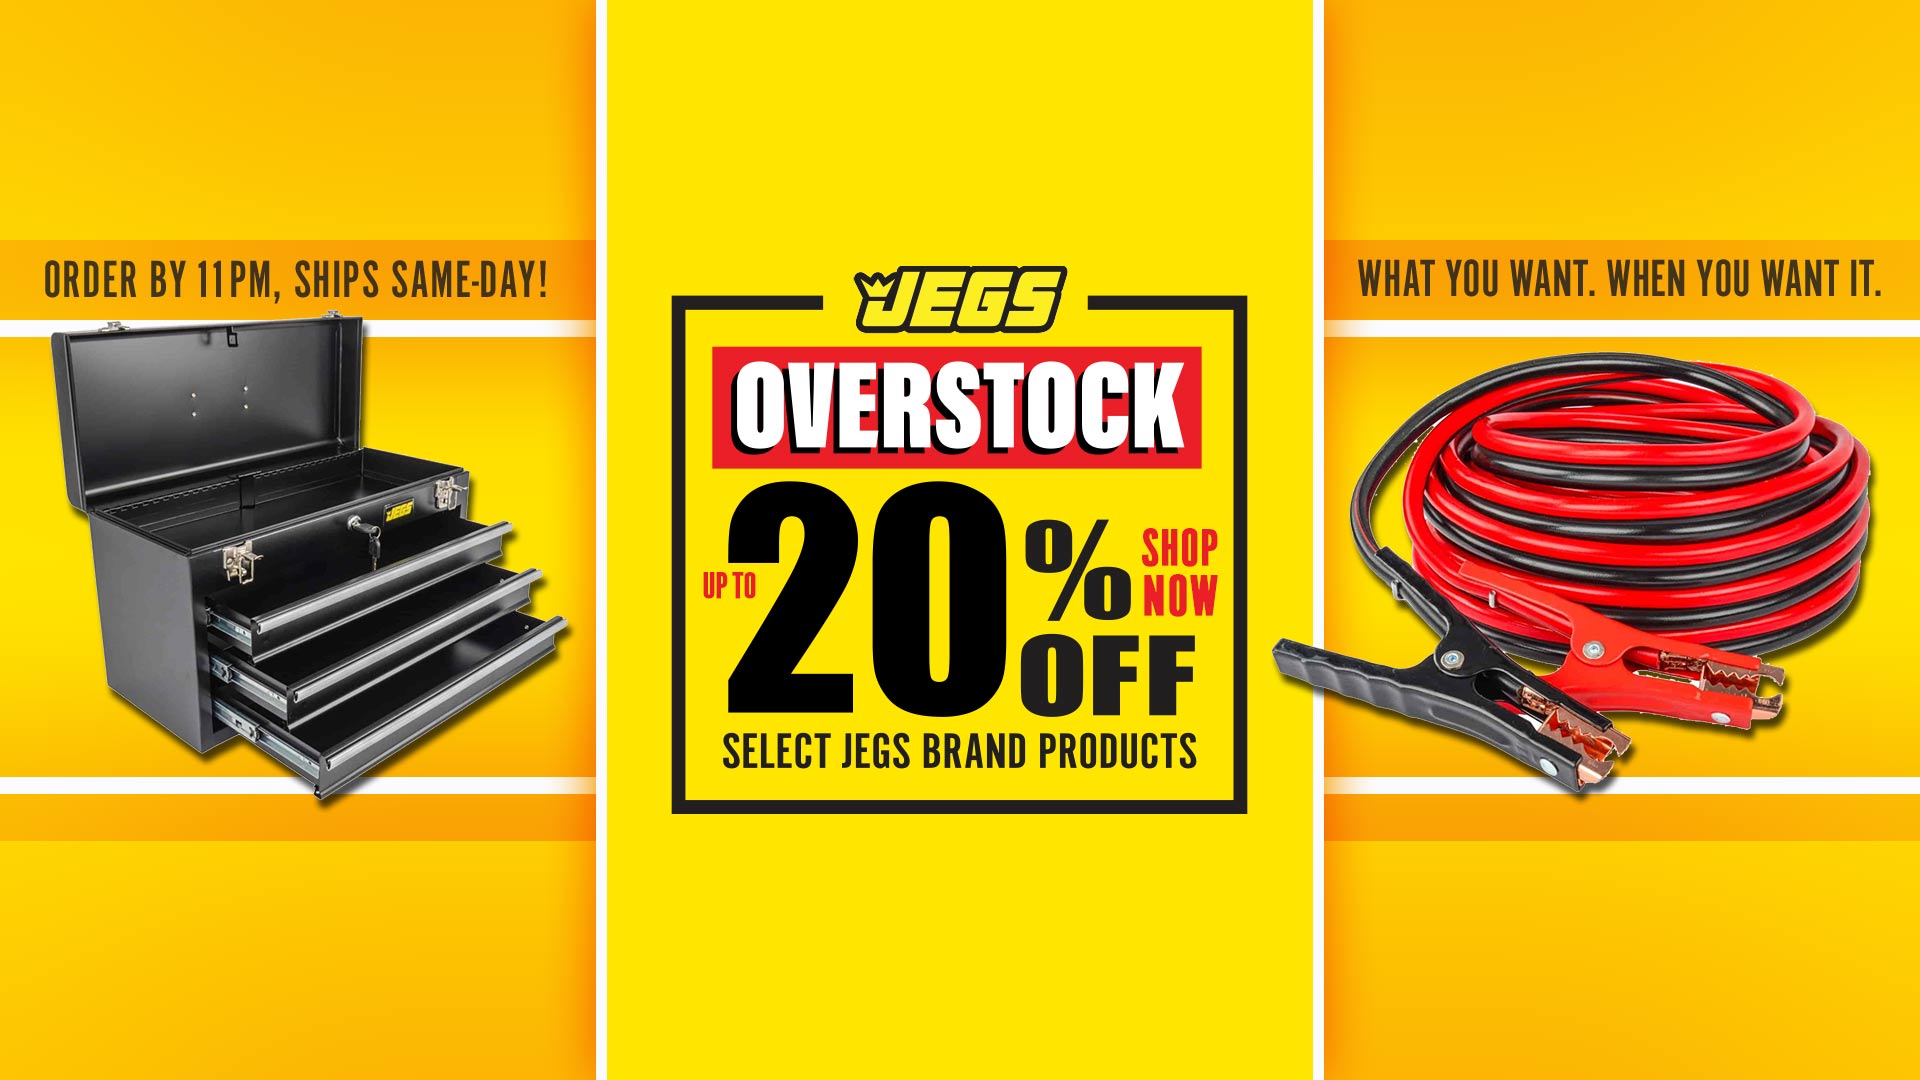 JEGS Overstock Sale Save Up to 20% Off